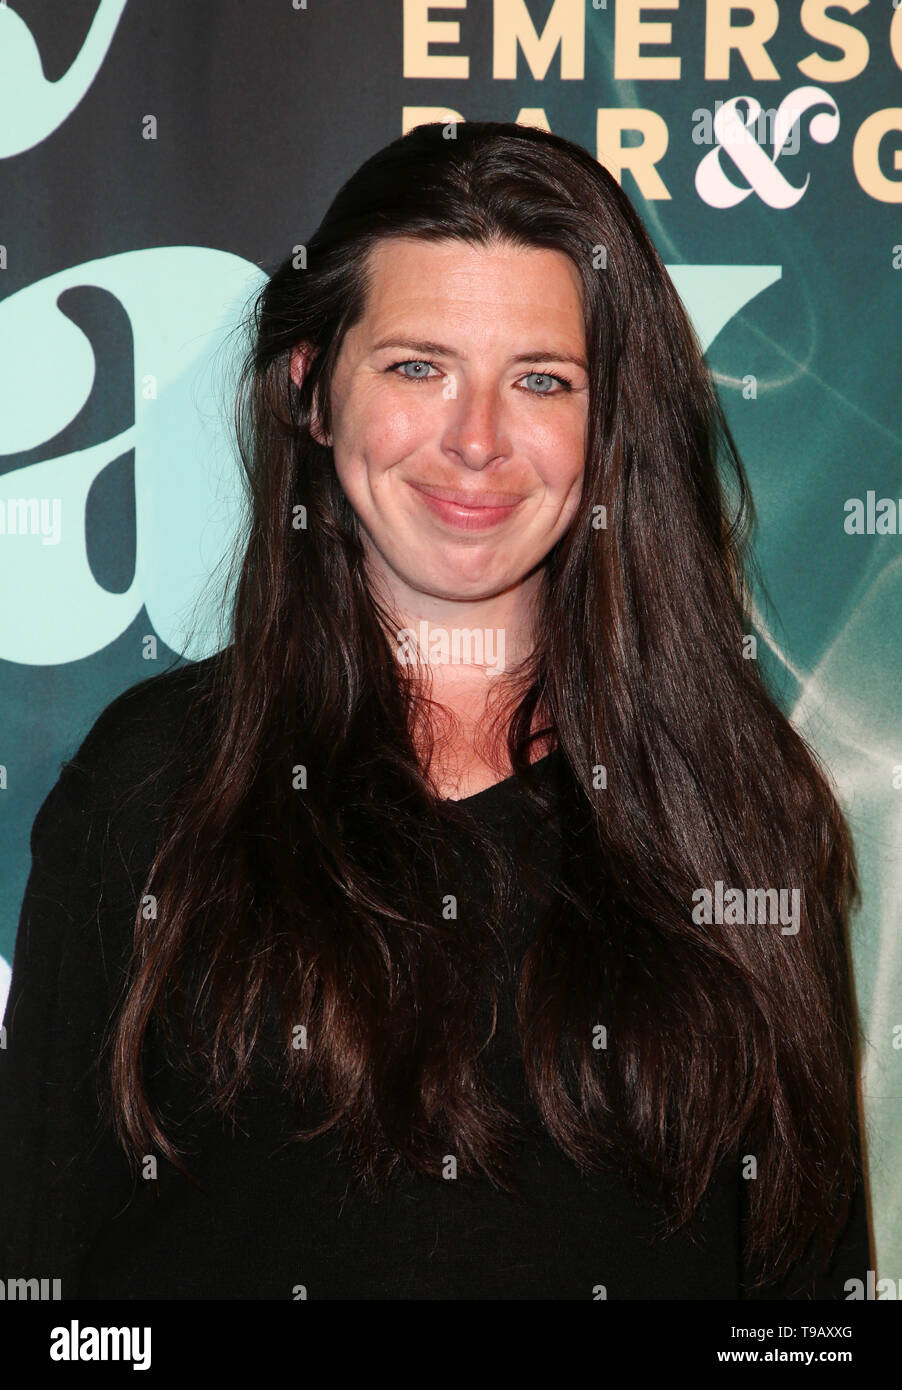 Burbank, Ca. 17th May, 2019. Heather Matarazzo, at the Lady Day at Emerson's Bar & Grill at the Garry Marshall Theatre in Burbank, California on May 17, 2019. Credit: Faye Sadou/Media Punch/Alamy Live News Stock Photo